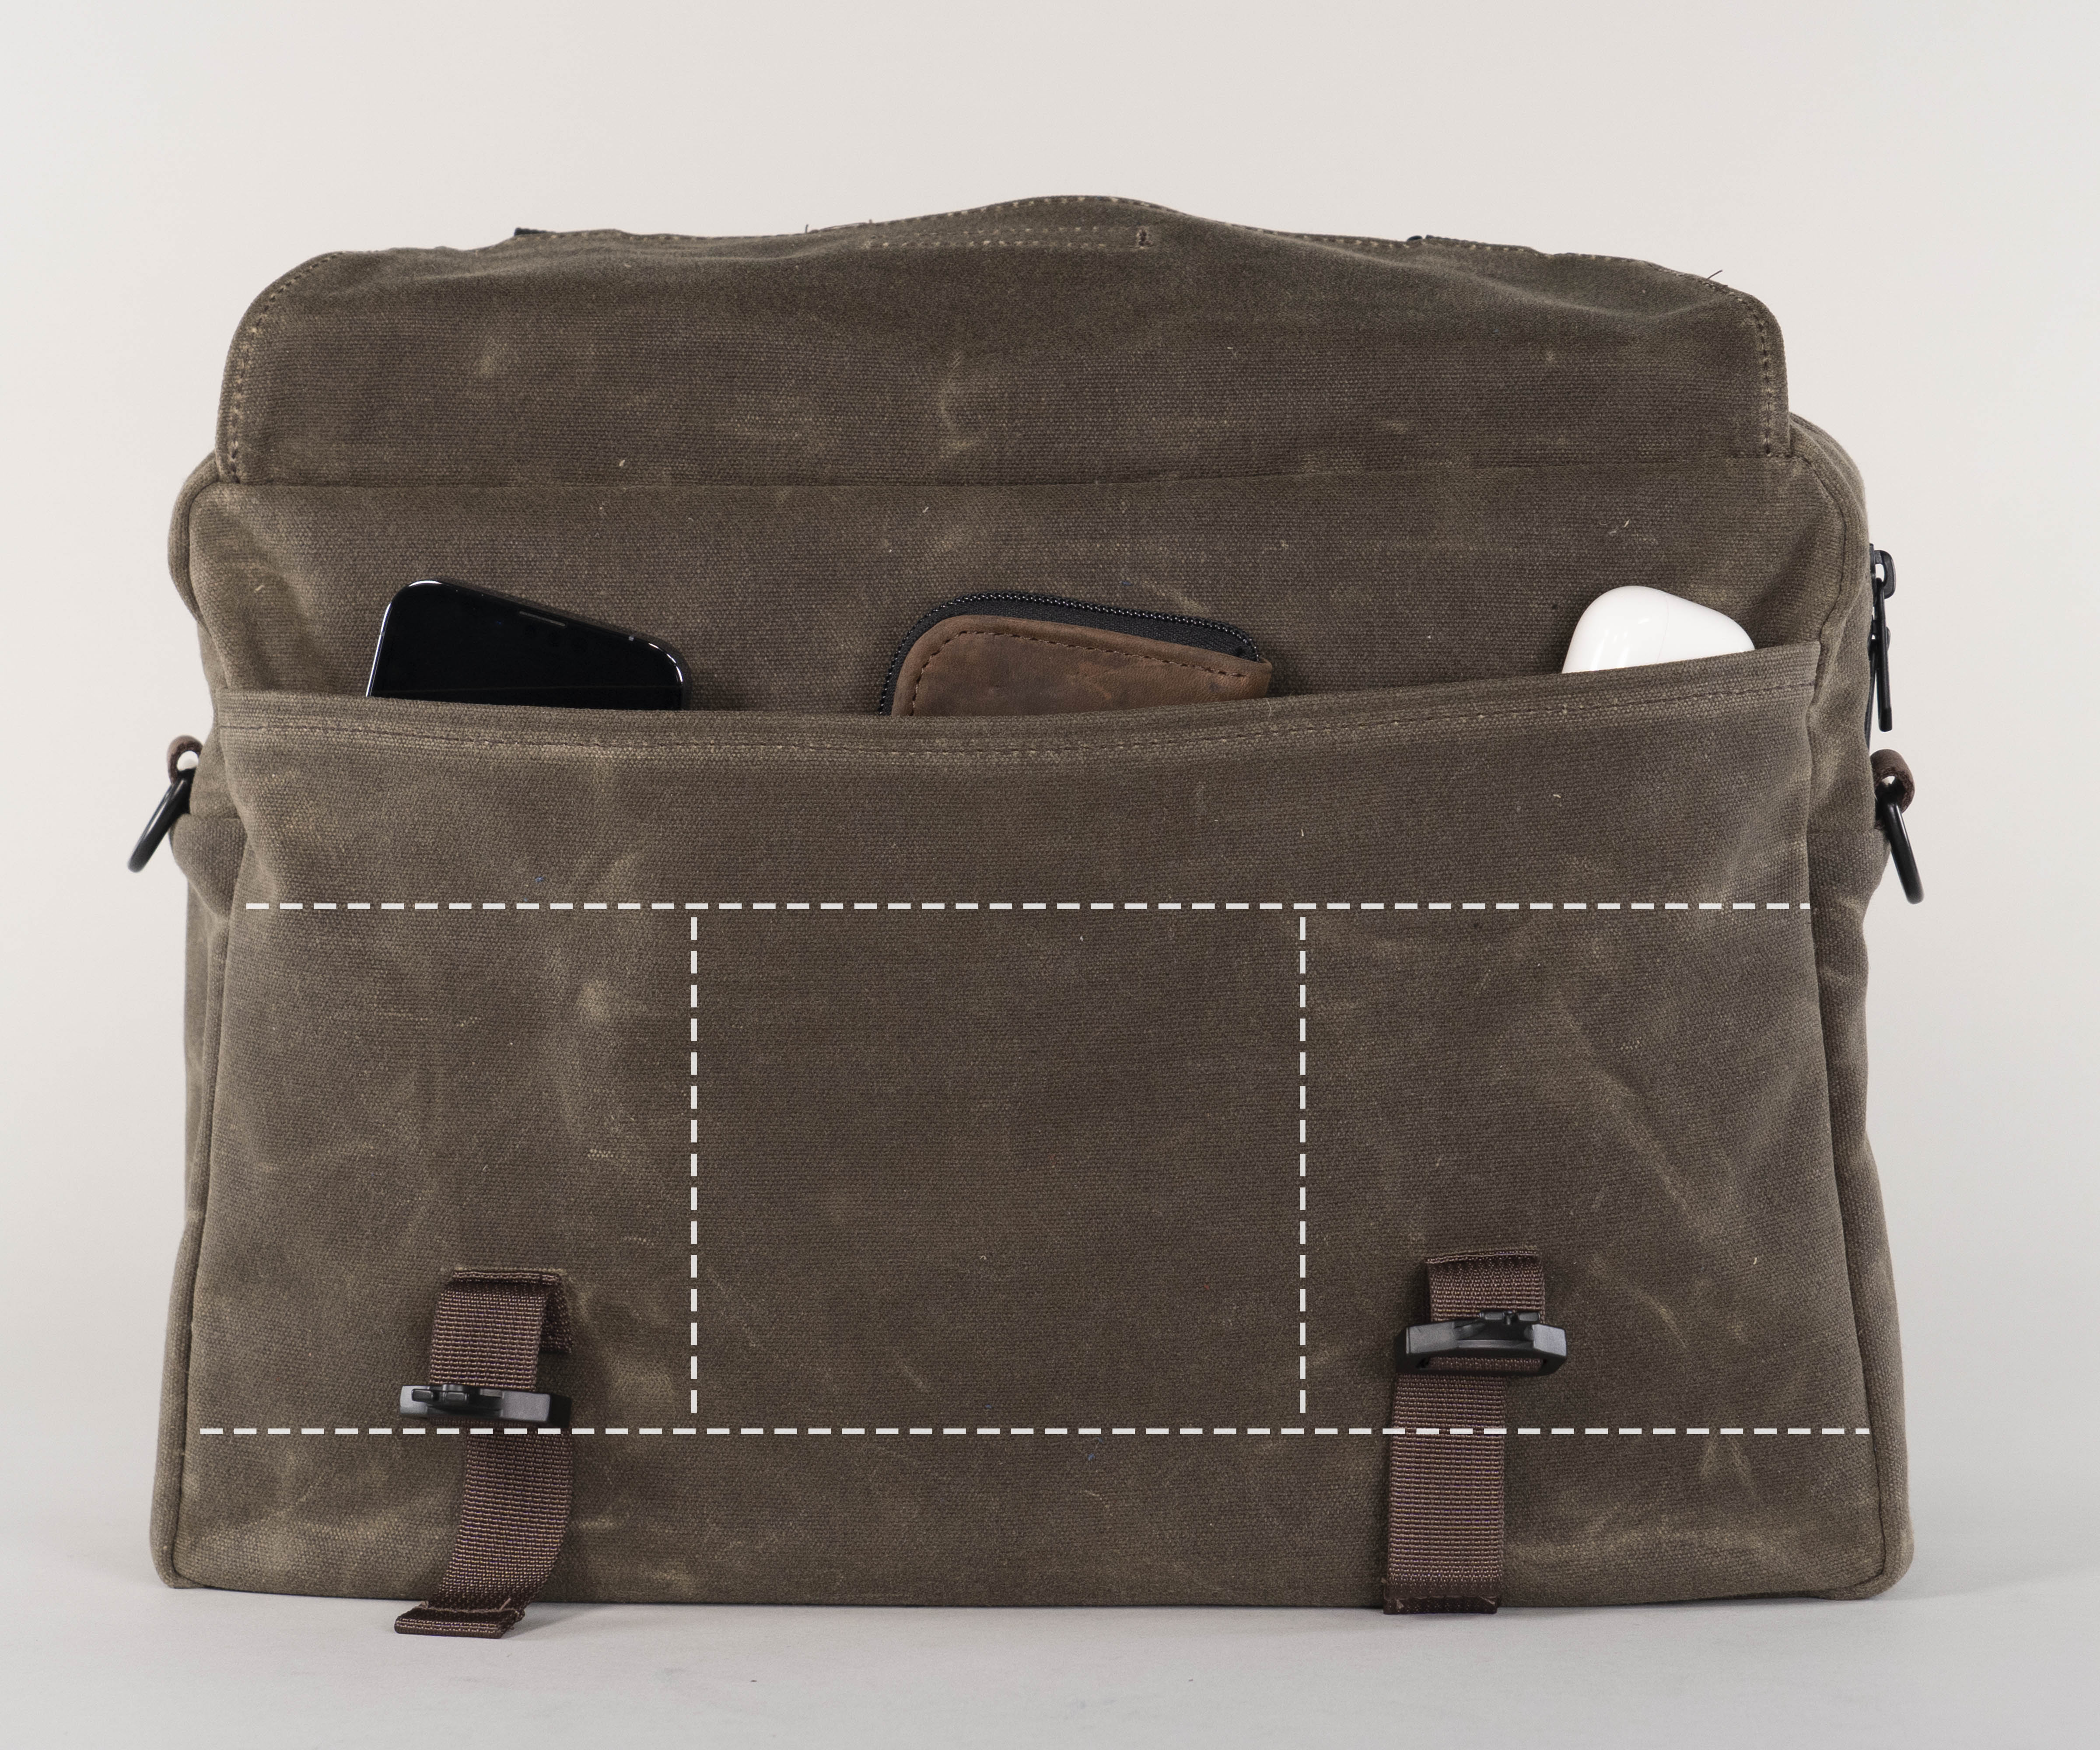 Large pocket under the front flap includes three interior organizational pockets